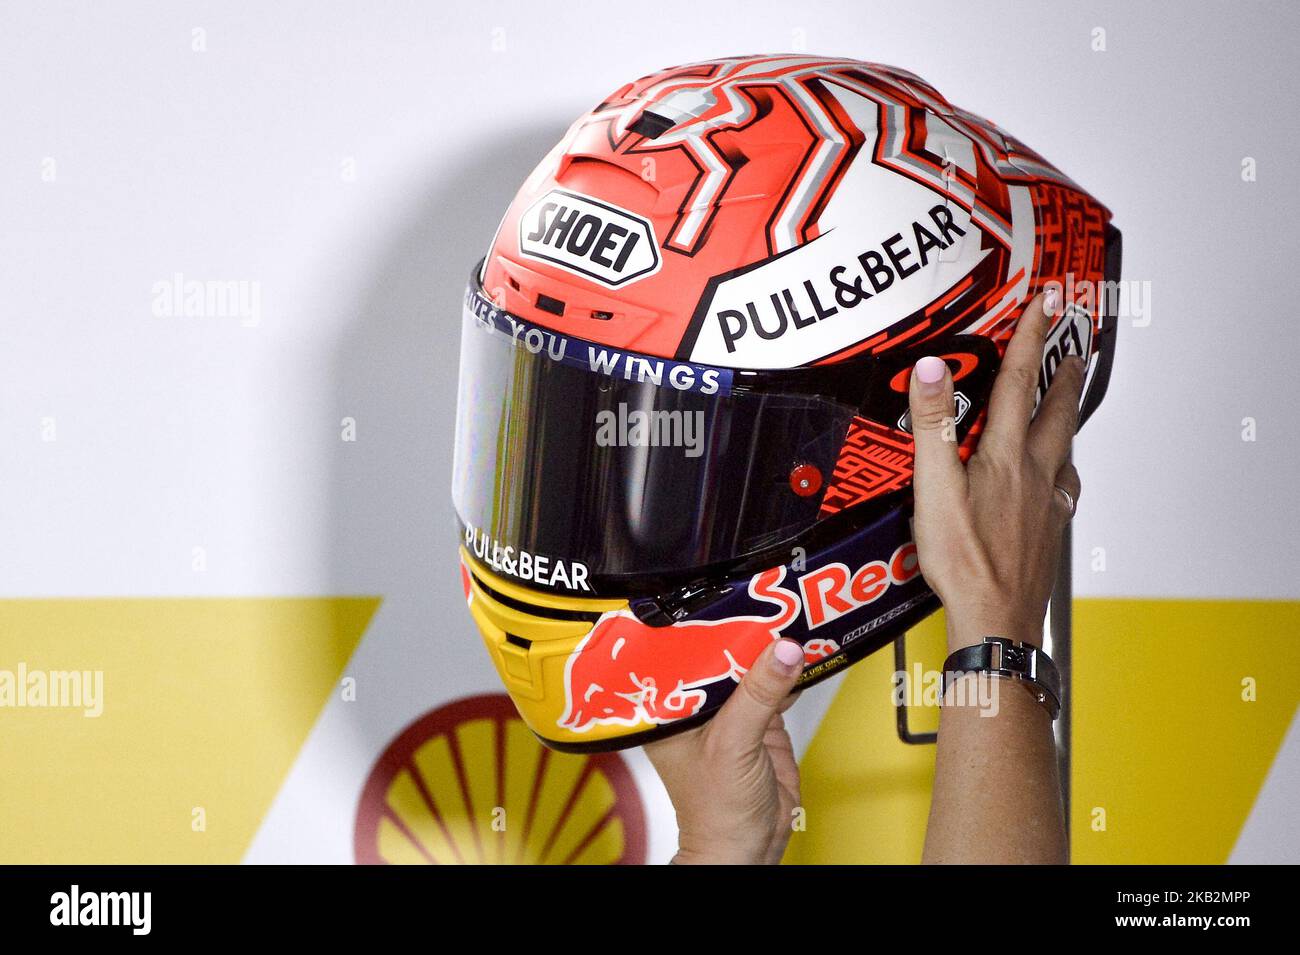 The helmet of Spanish rider Marc Marquez and Honda Repsol Team being  prepared during a press conference ahead of the Malaysian MotoGP at the  Sepang International circuit in Sepang on November 1,